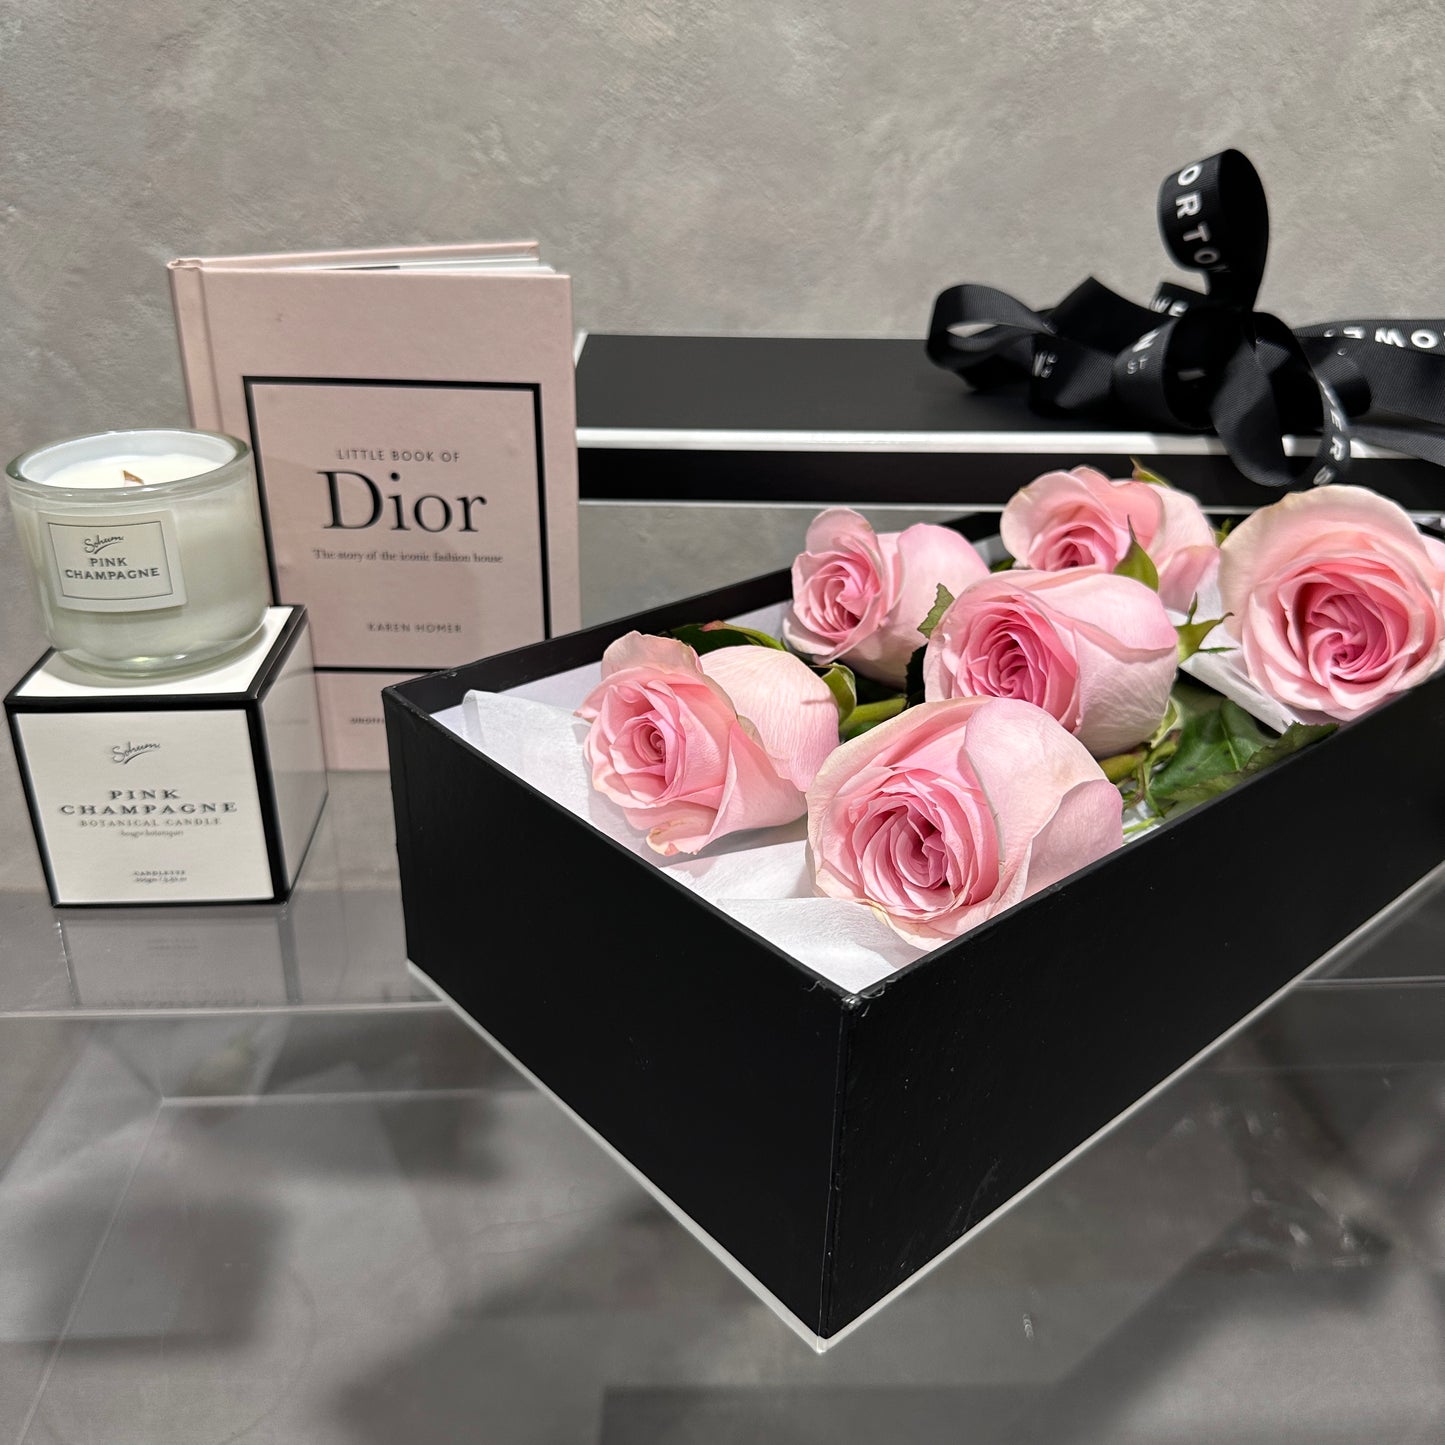 The Rose Gift Box